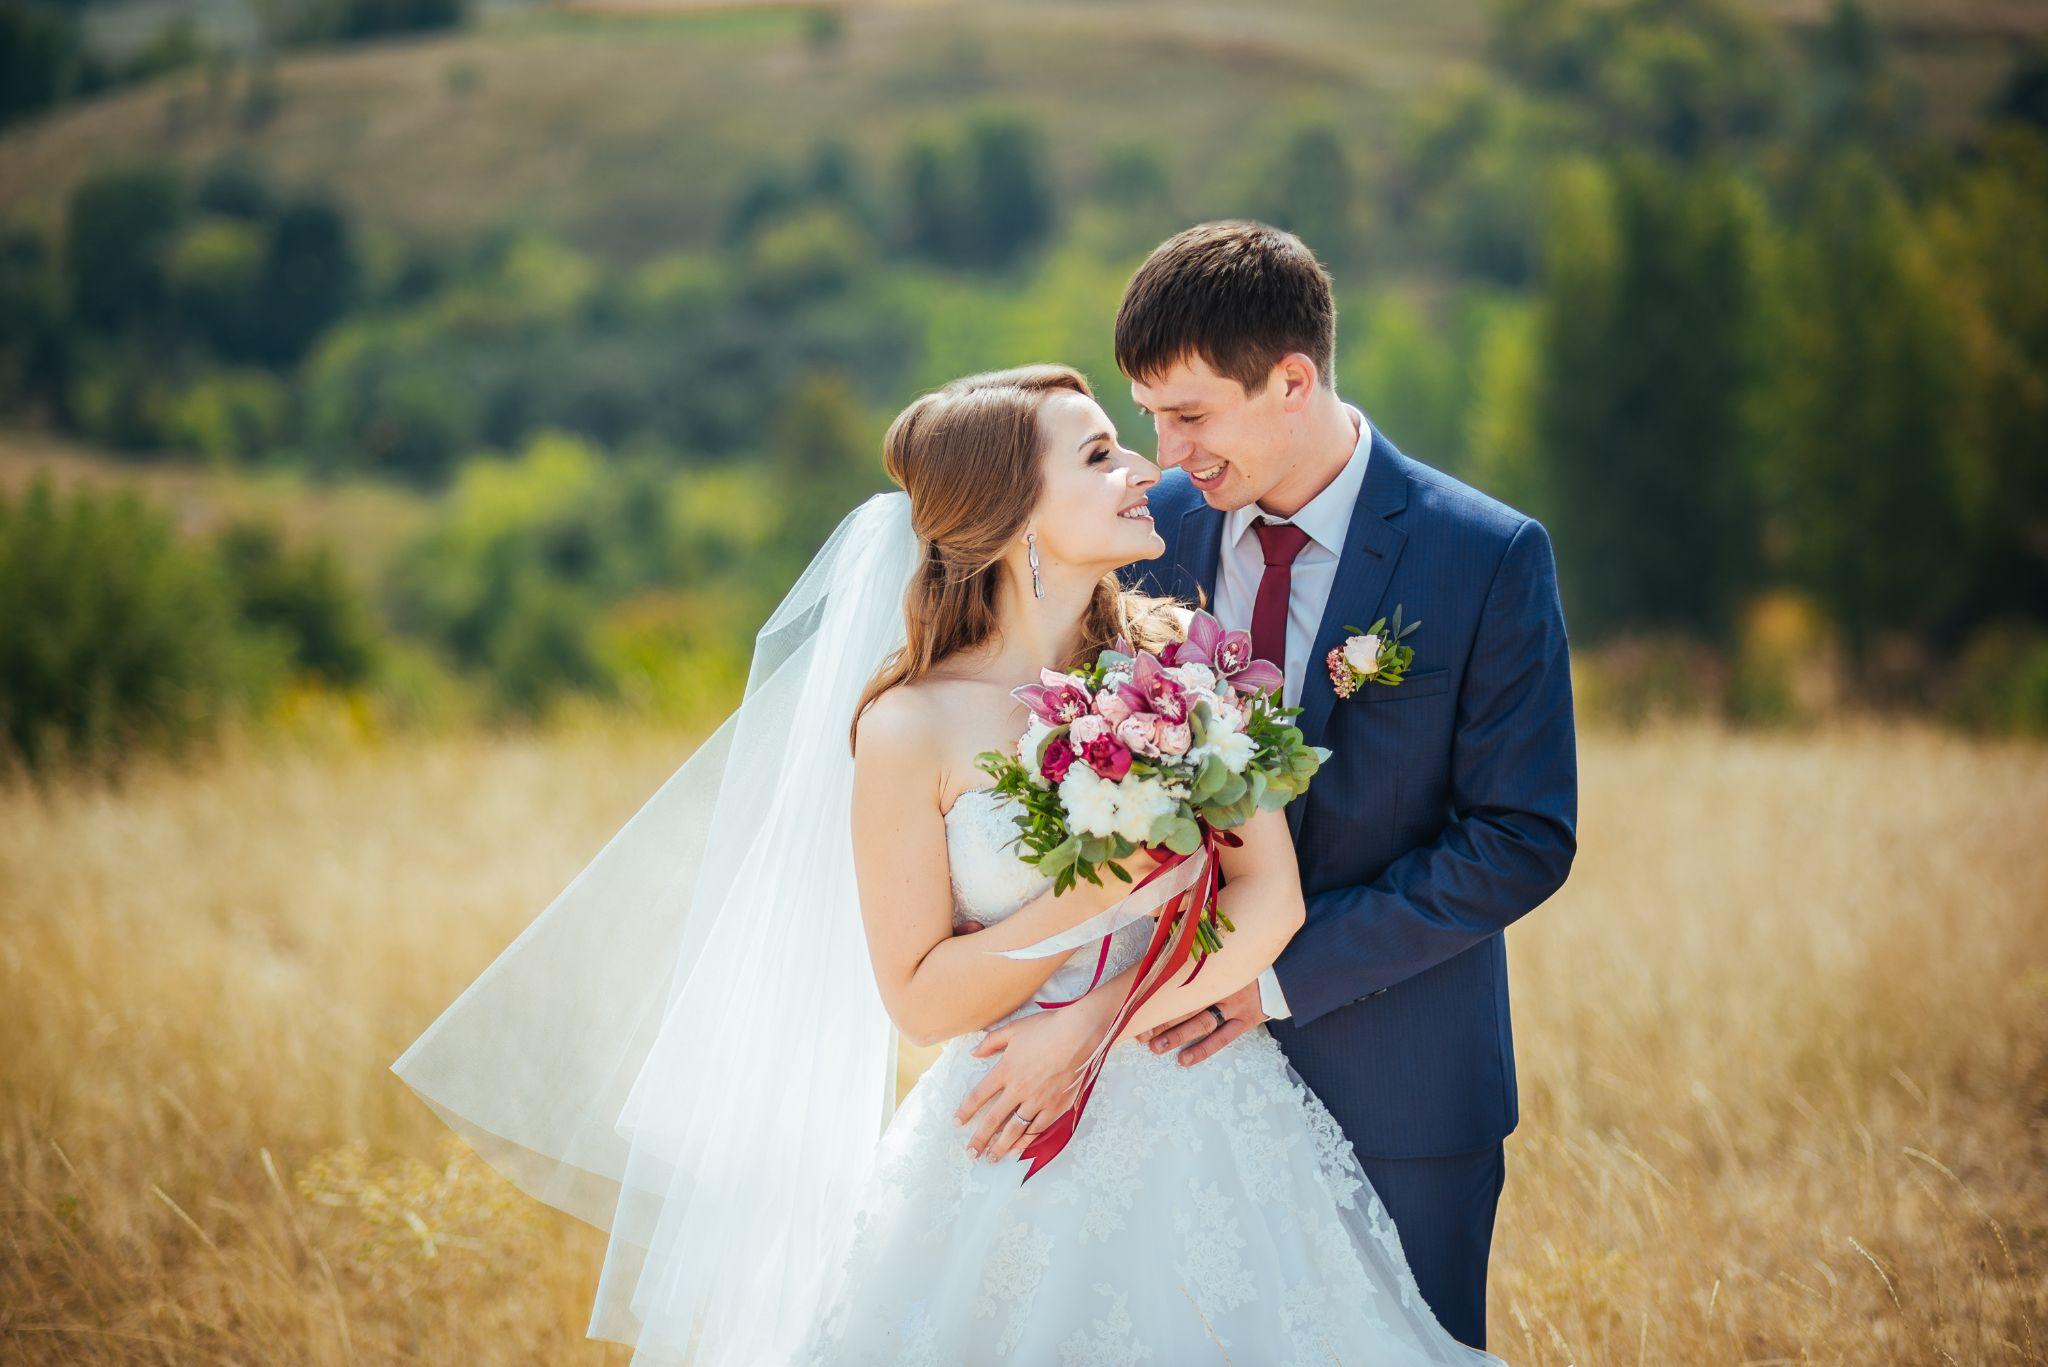 42 Unforgettable Wedding Photo Ideas In Your Wedding Day For Your Album -   Blog